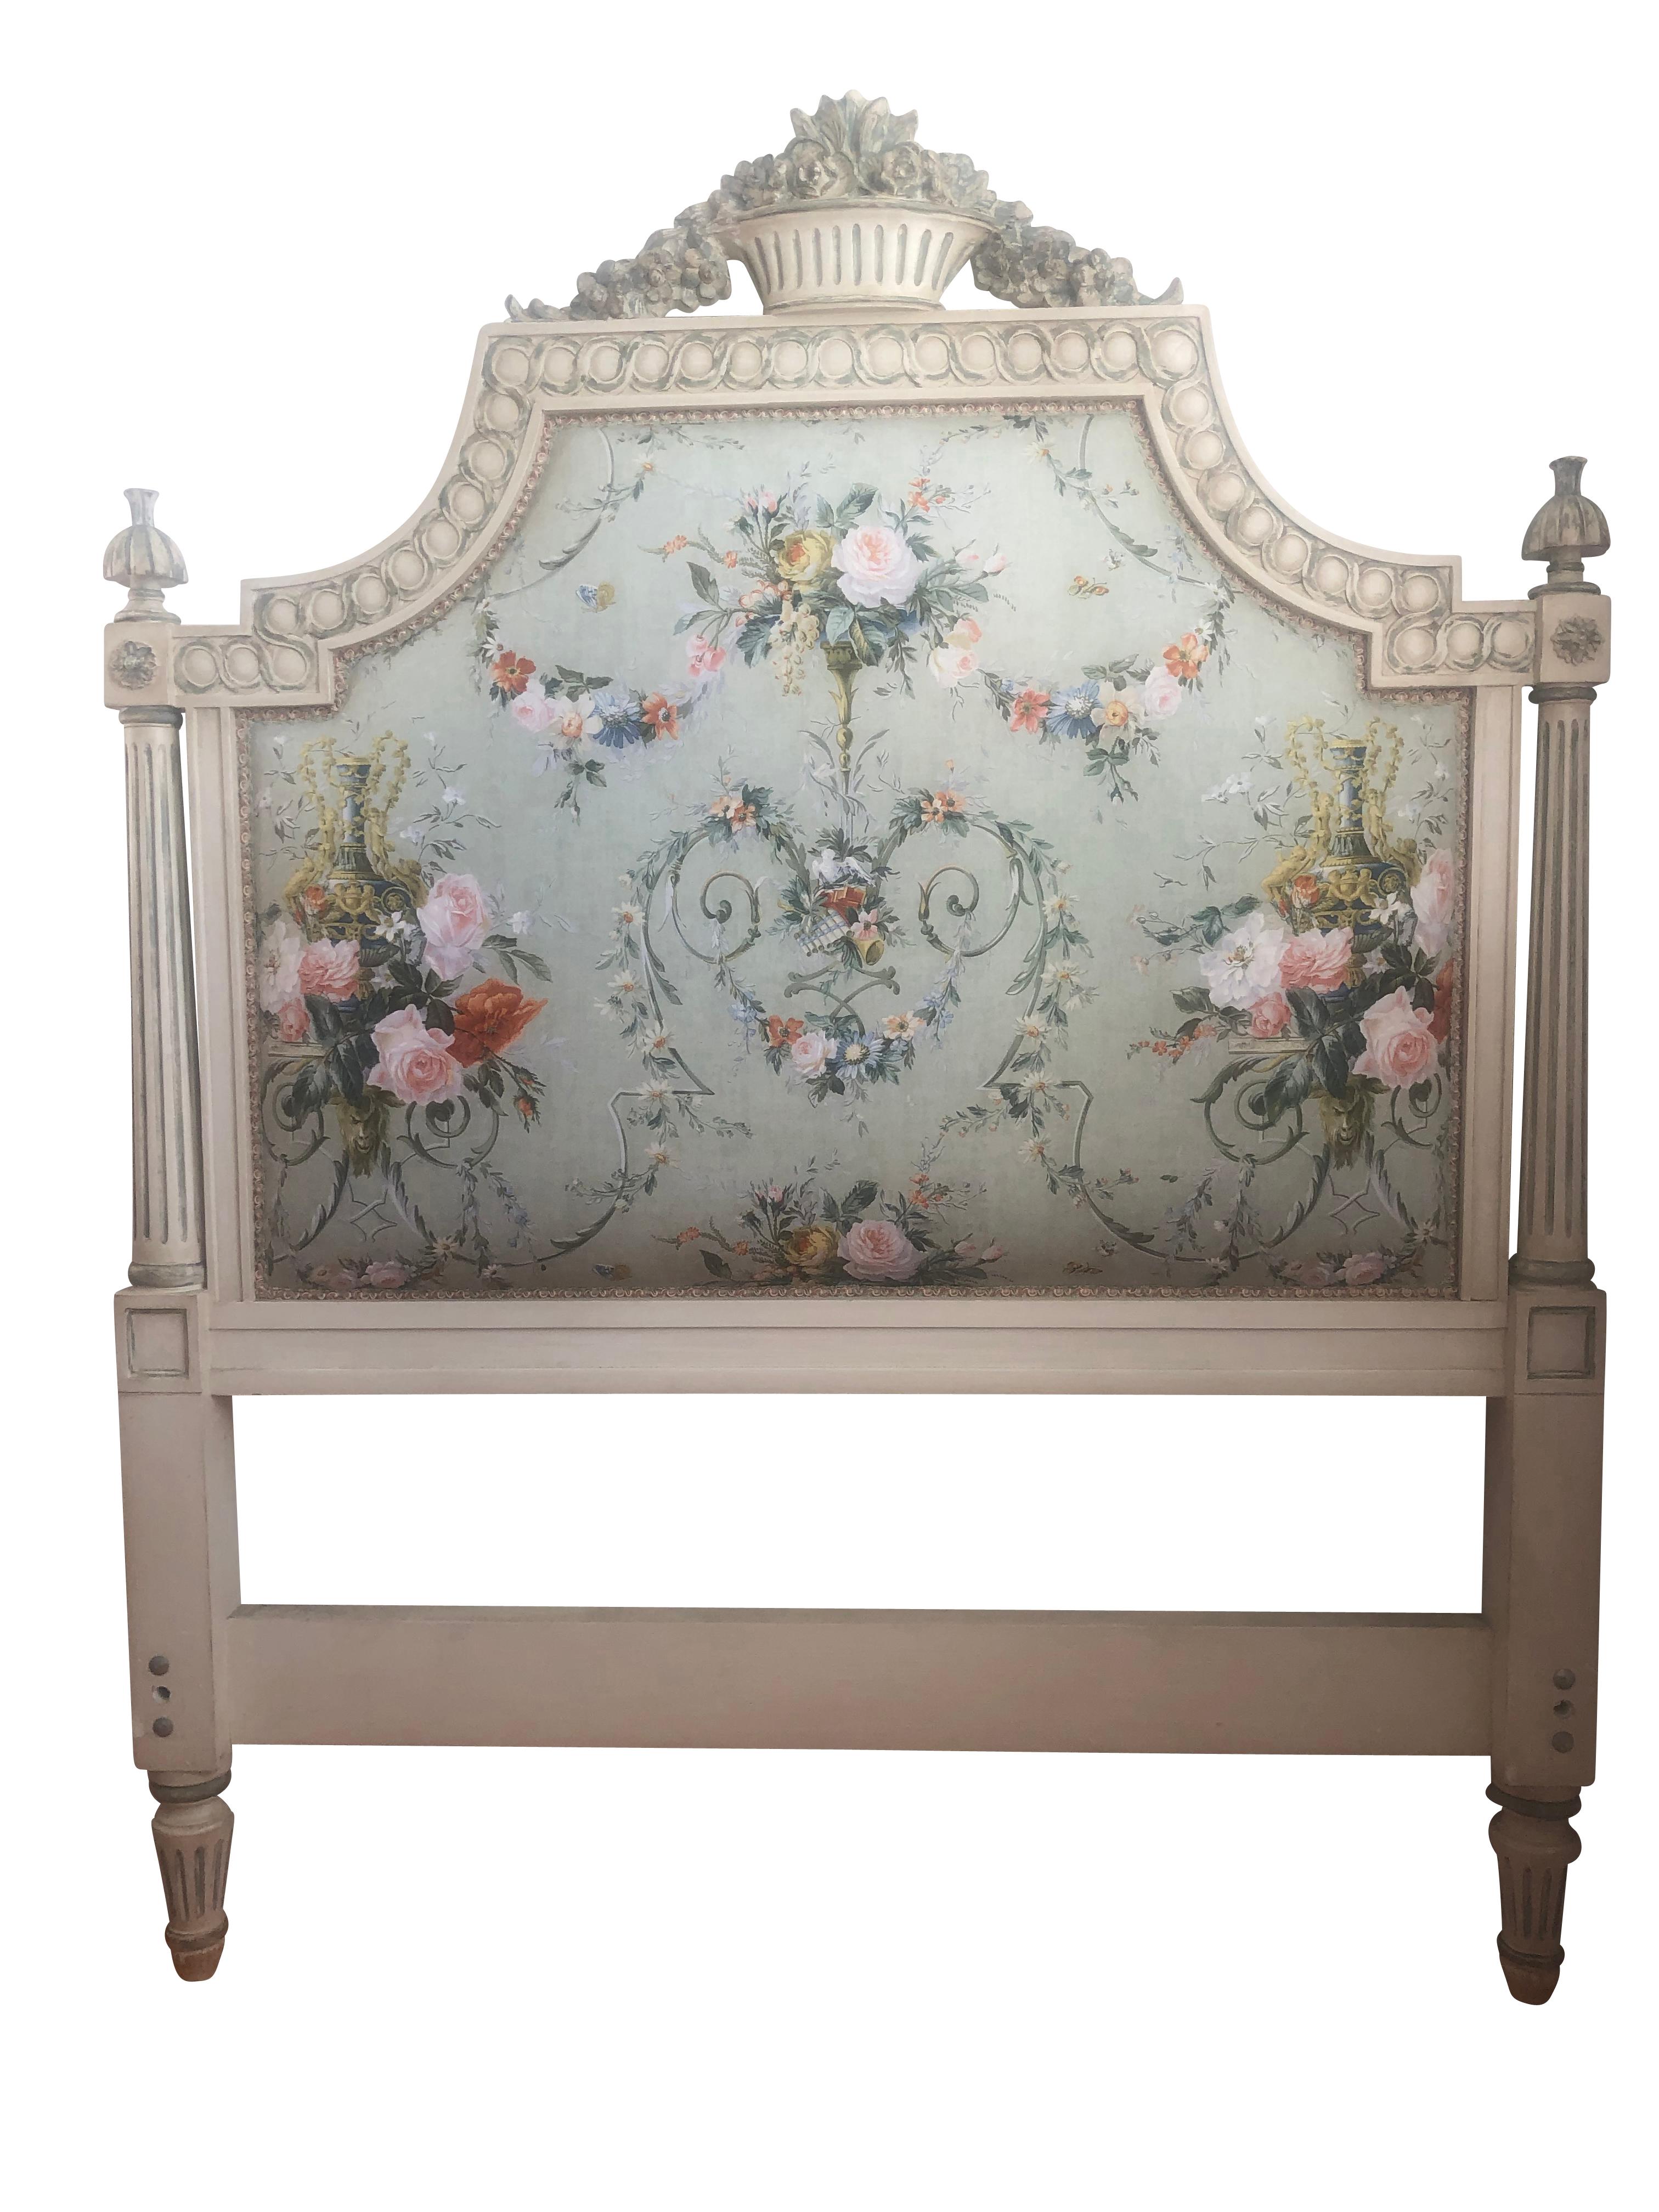 Pair of French Louis XIV style carved twin grey painted headboards perfect for a king size bed with classical polished cotton upholstery. Classical garlands, fruit basket, and egg, and dart decorative carvings. Measures: 54 inches height x 42 inches